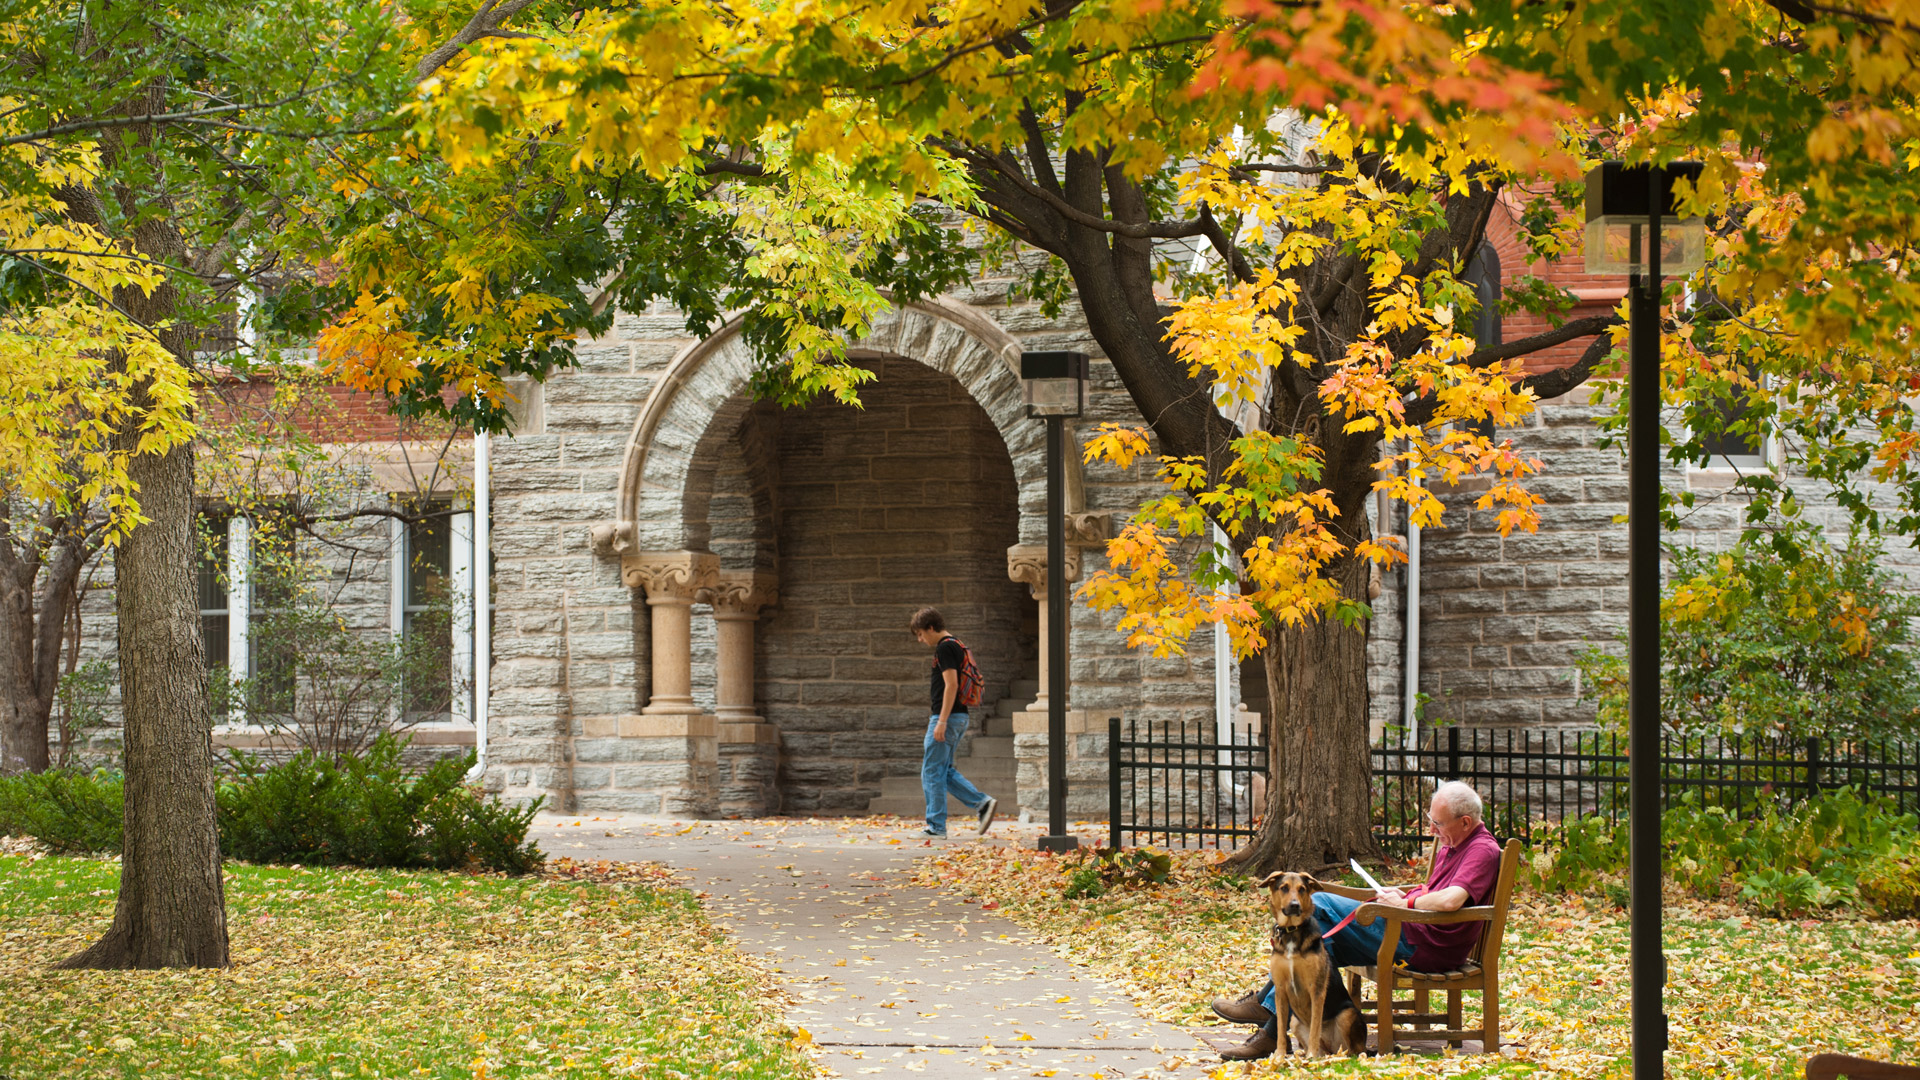 About - English - Macalester College